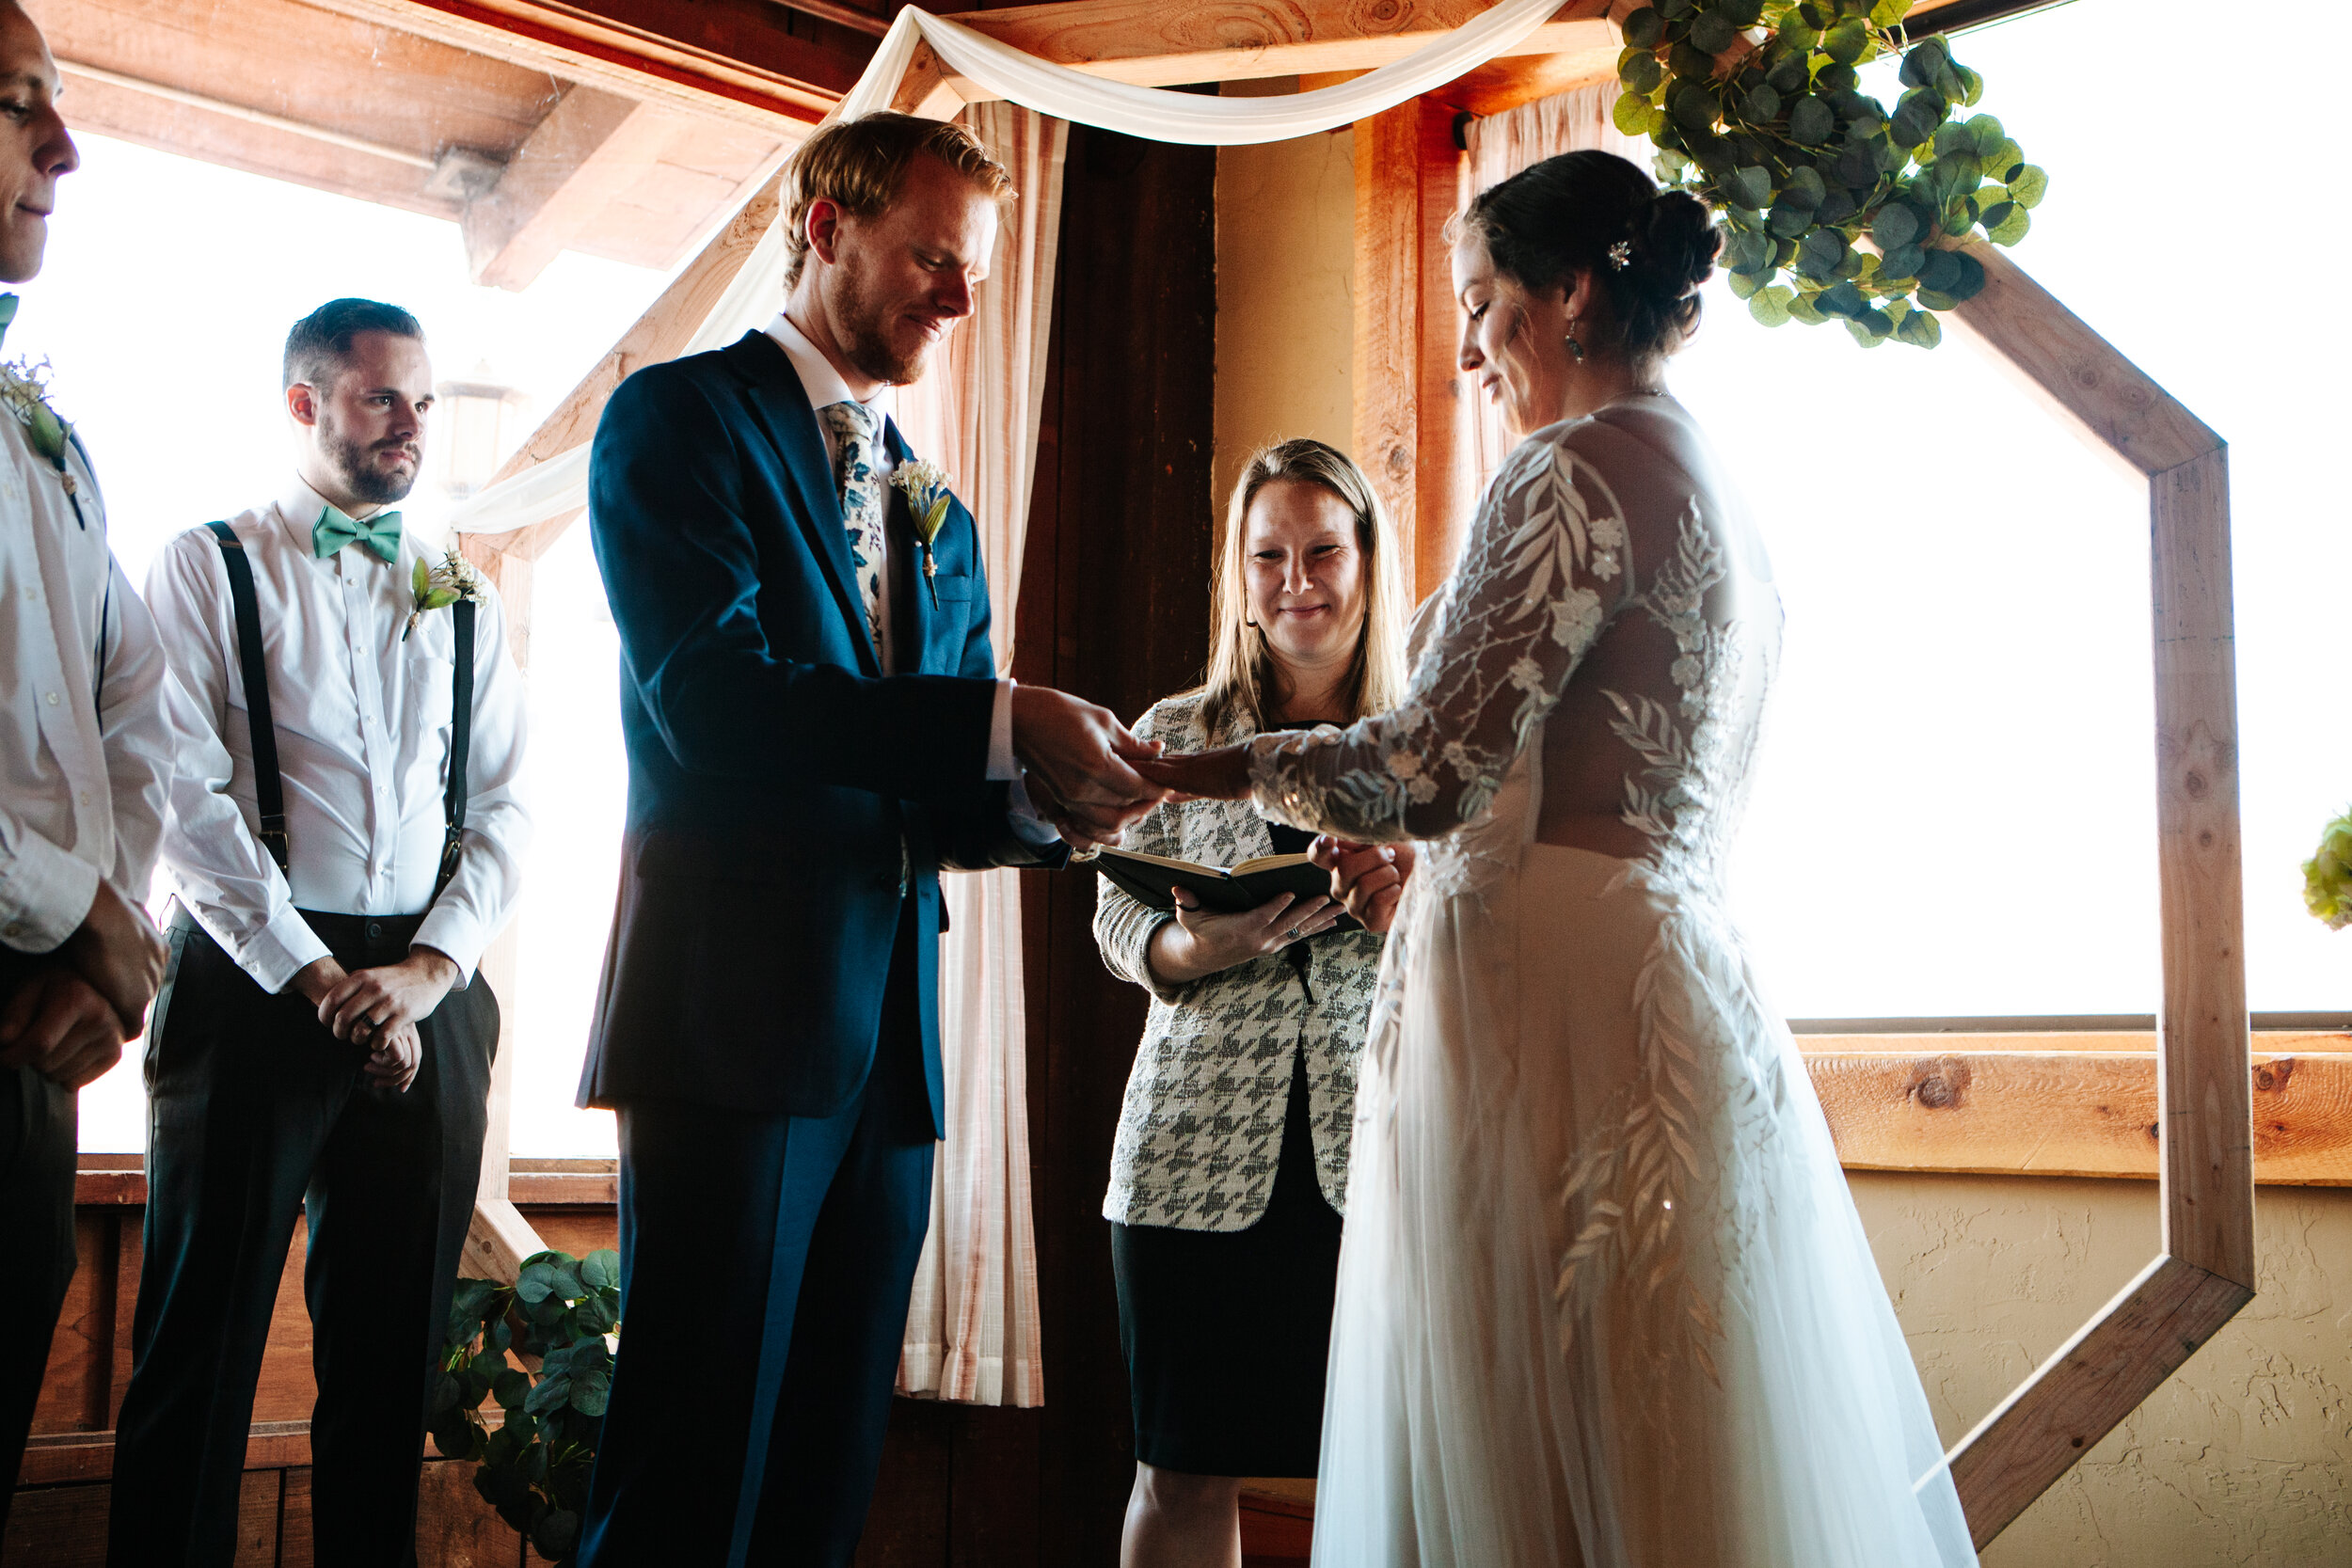 Couple exchanging their rings at their wedding ceremony near Moab, Utah.